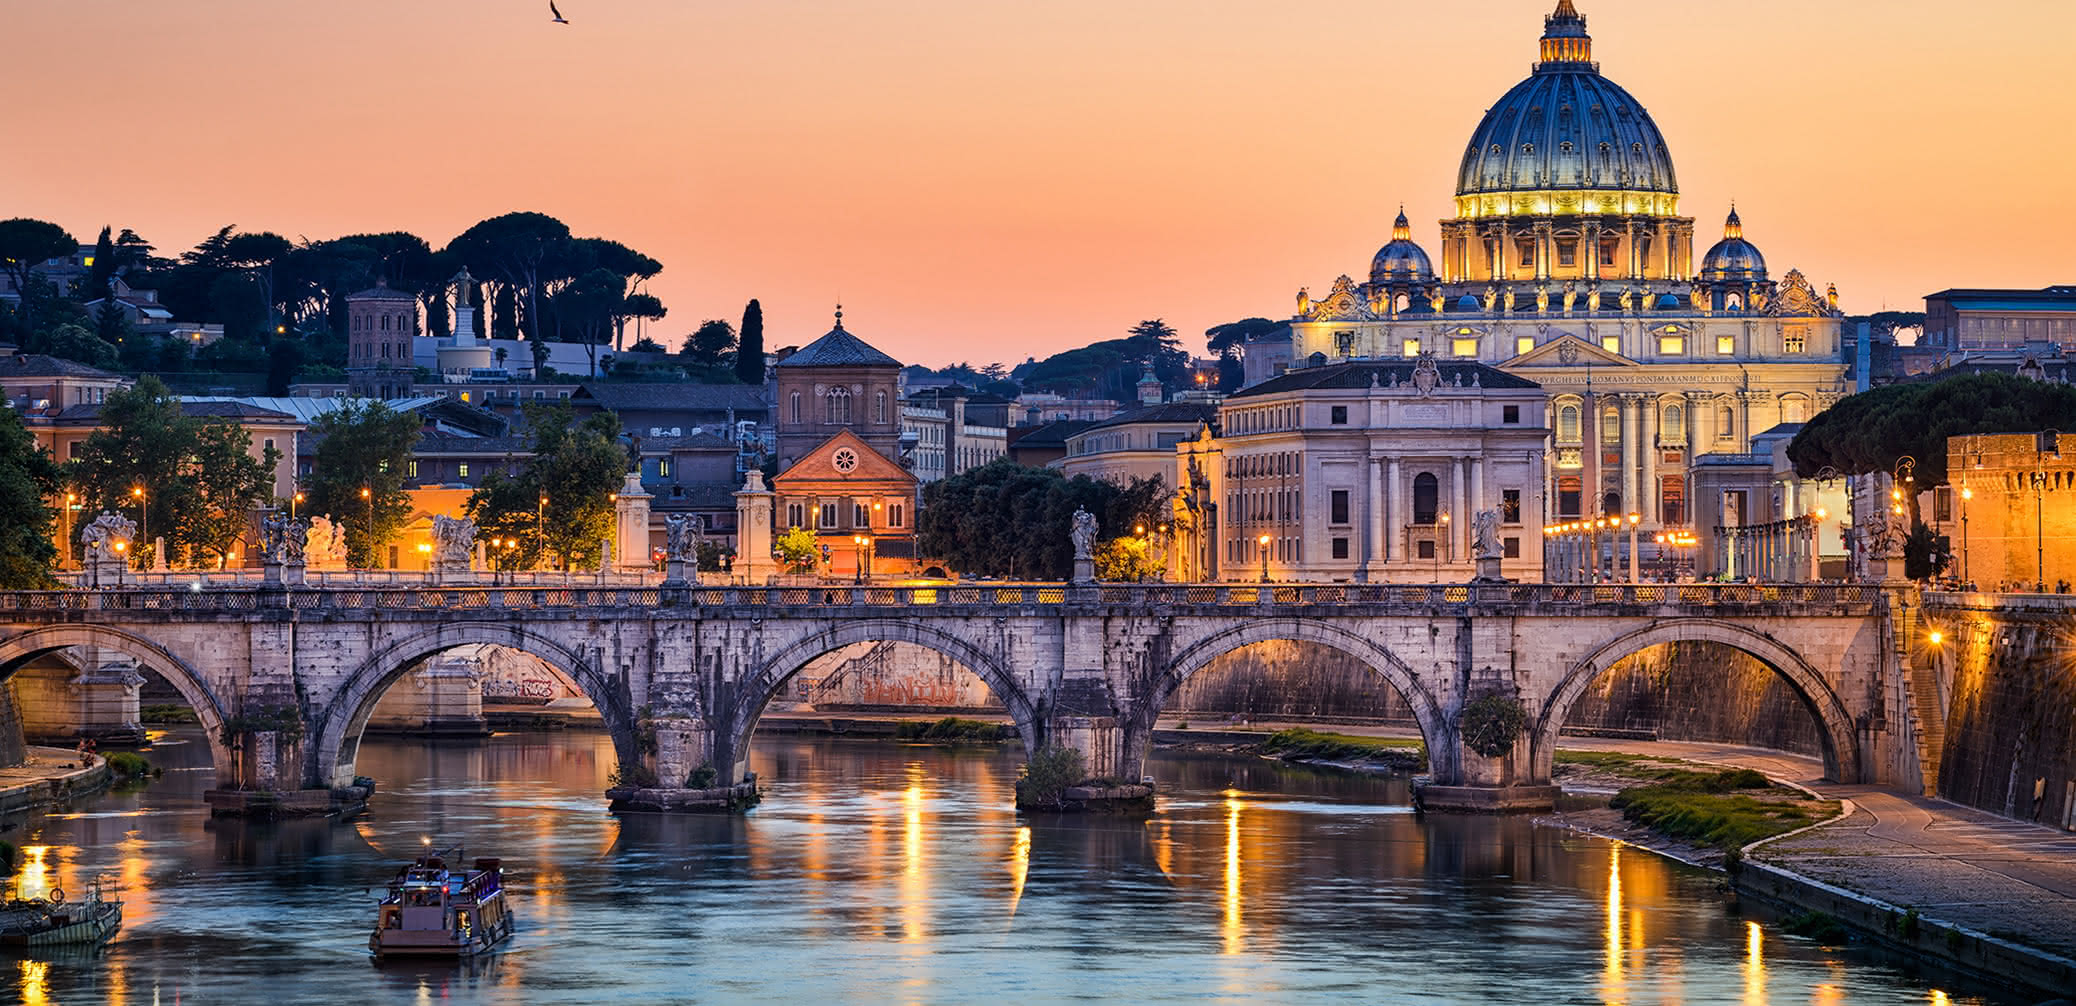 Is There A Ritz-Carlton In Rome?